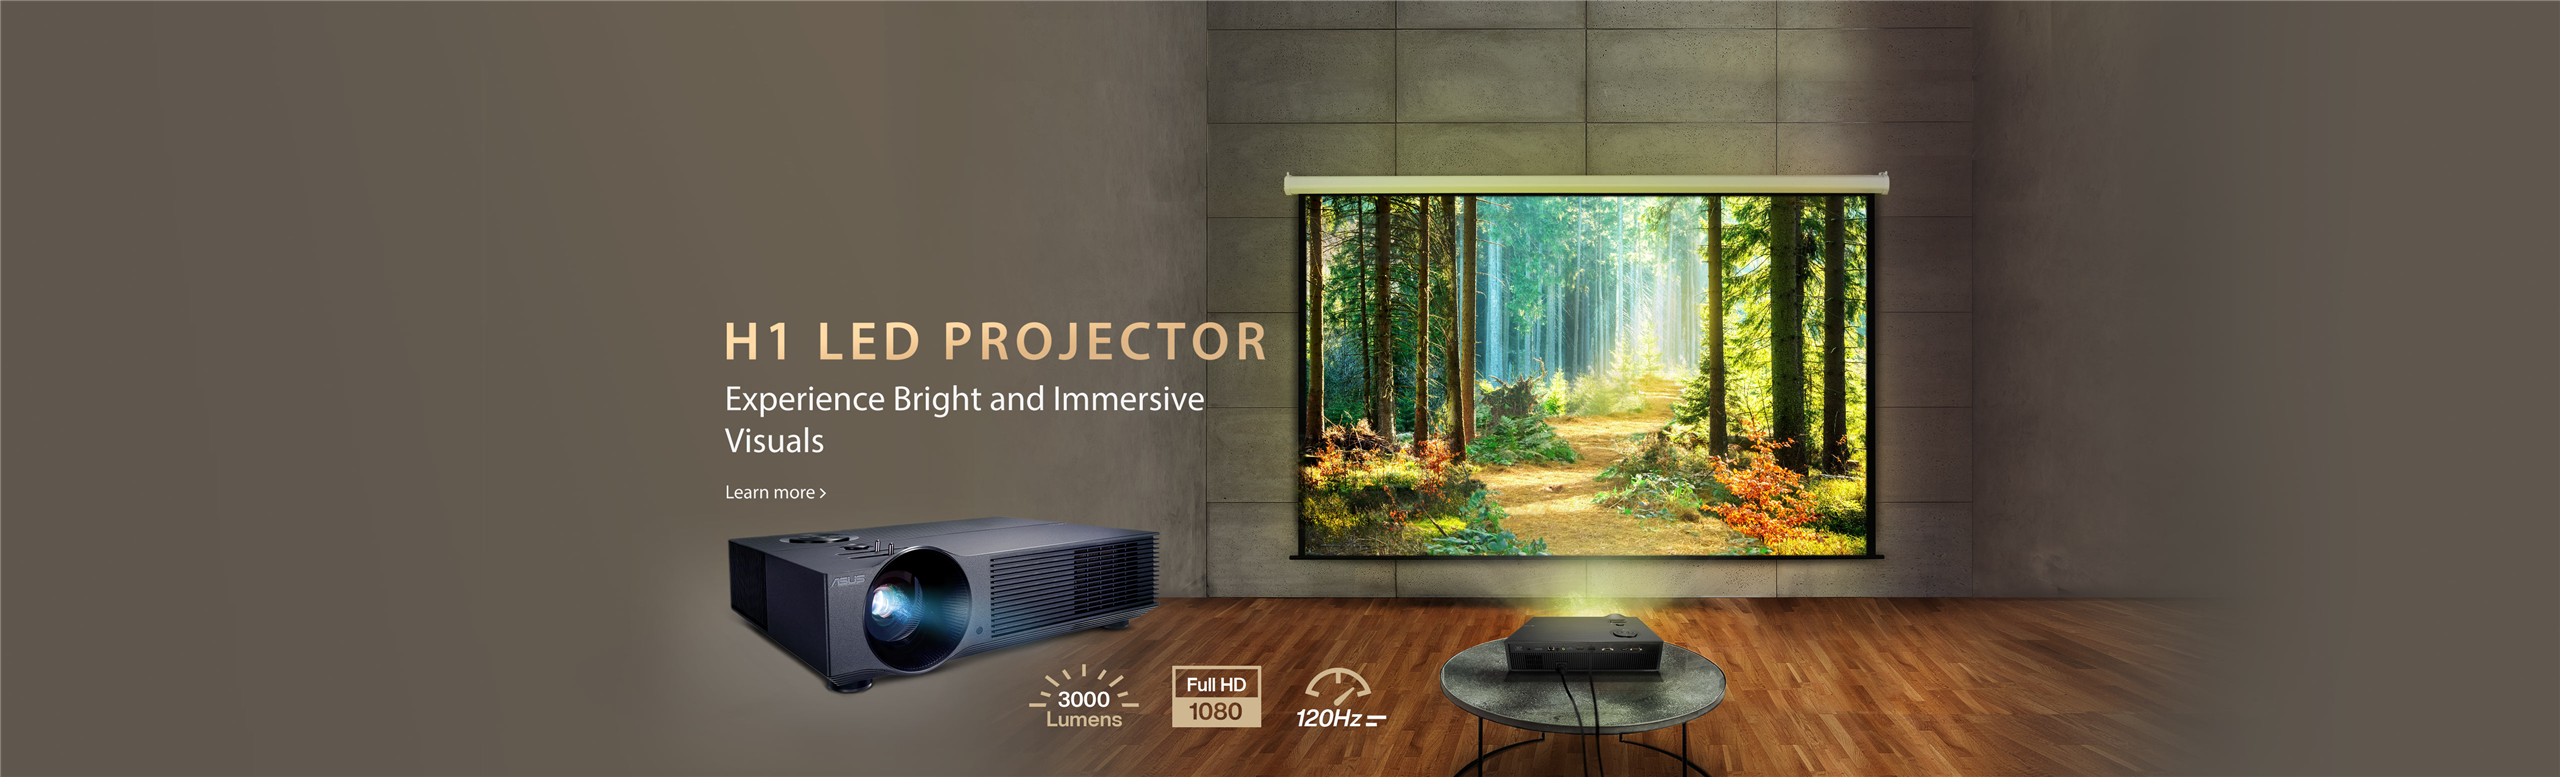 ASUS H1, FHD, 3000 Lumens, 120 Hz LED home theater projector in the living room, projecting forest image